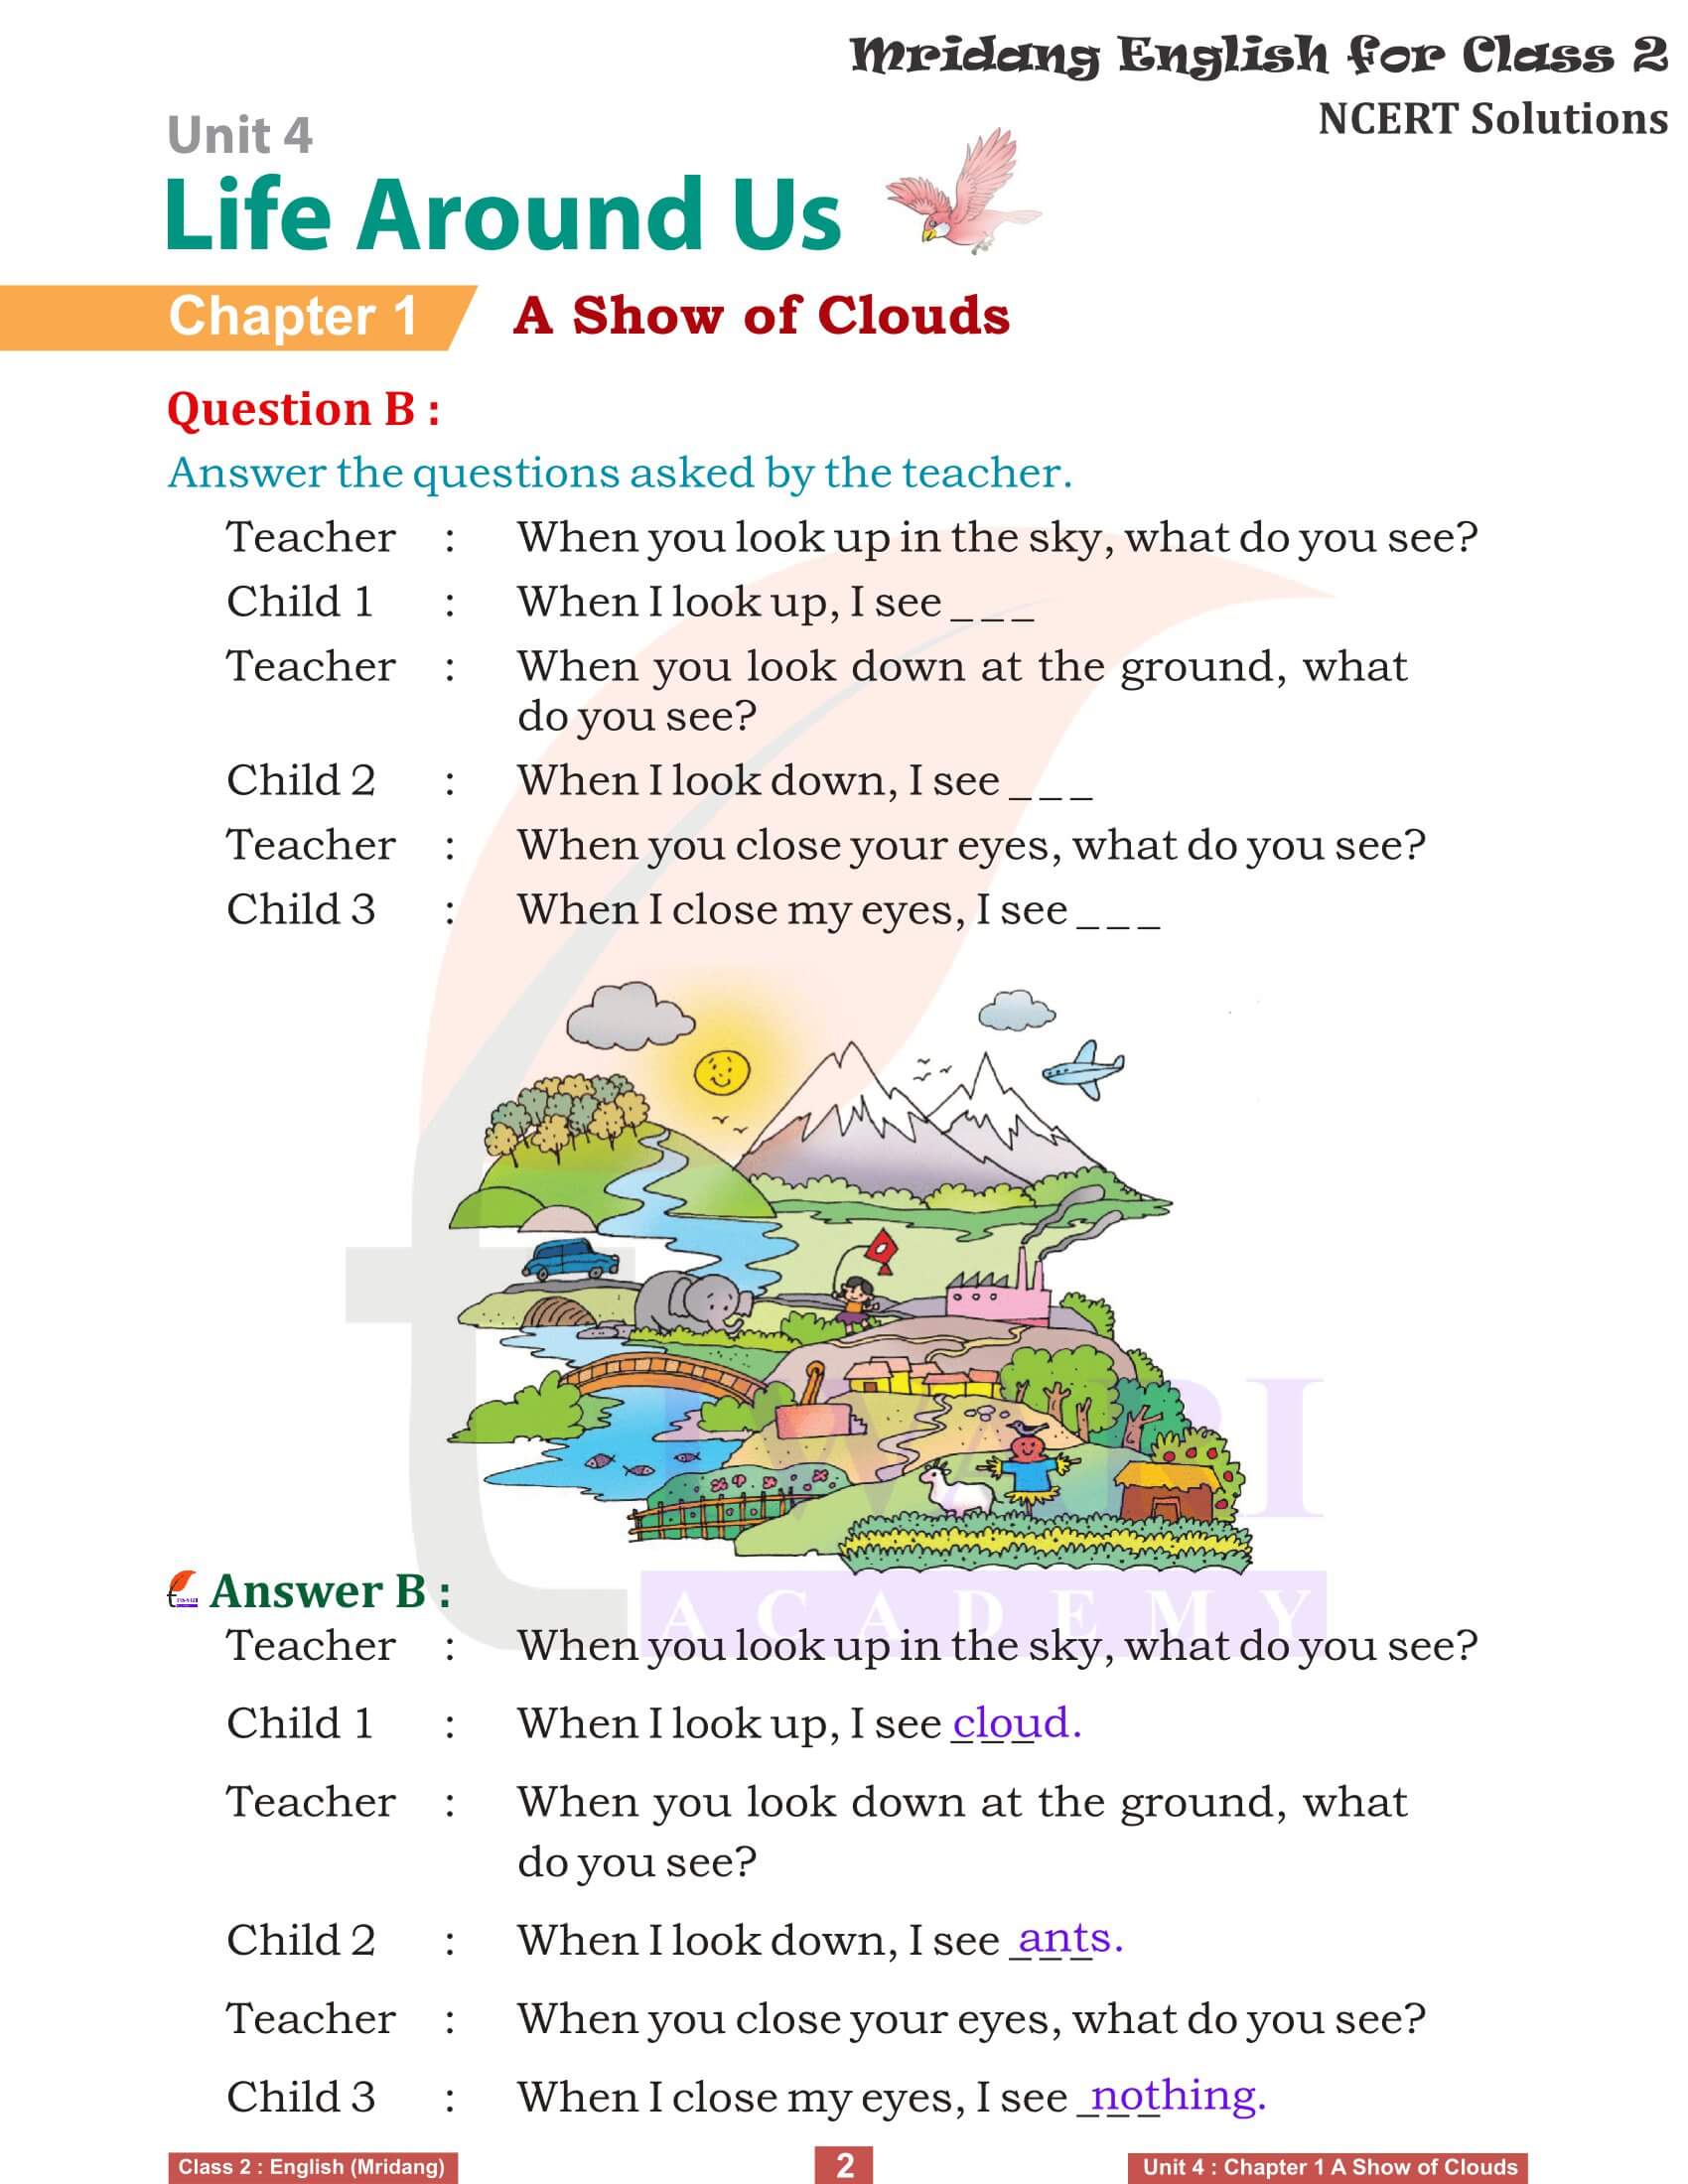 Class 2 English Mridang Unit 4 Life Around Us Chapter 1 A Show of Clouds